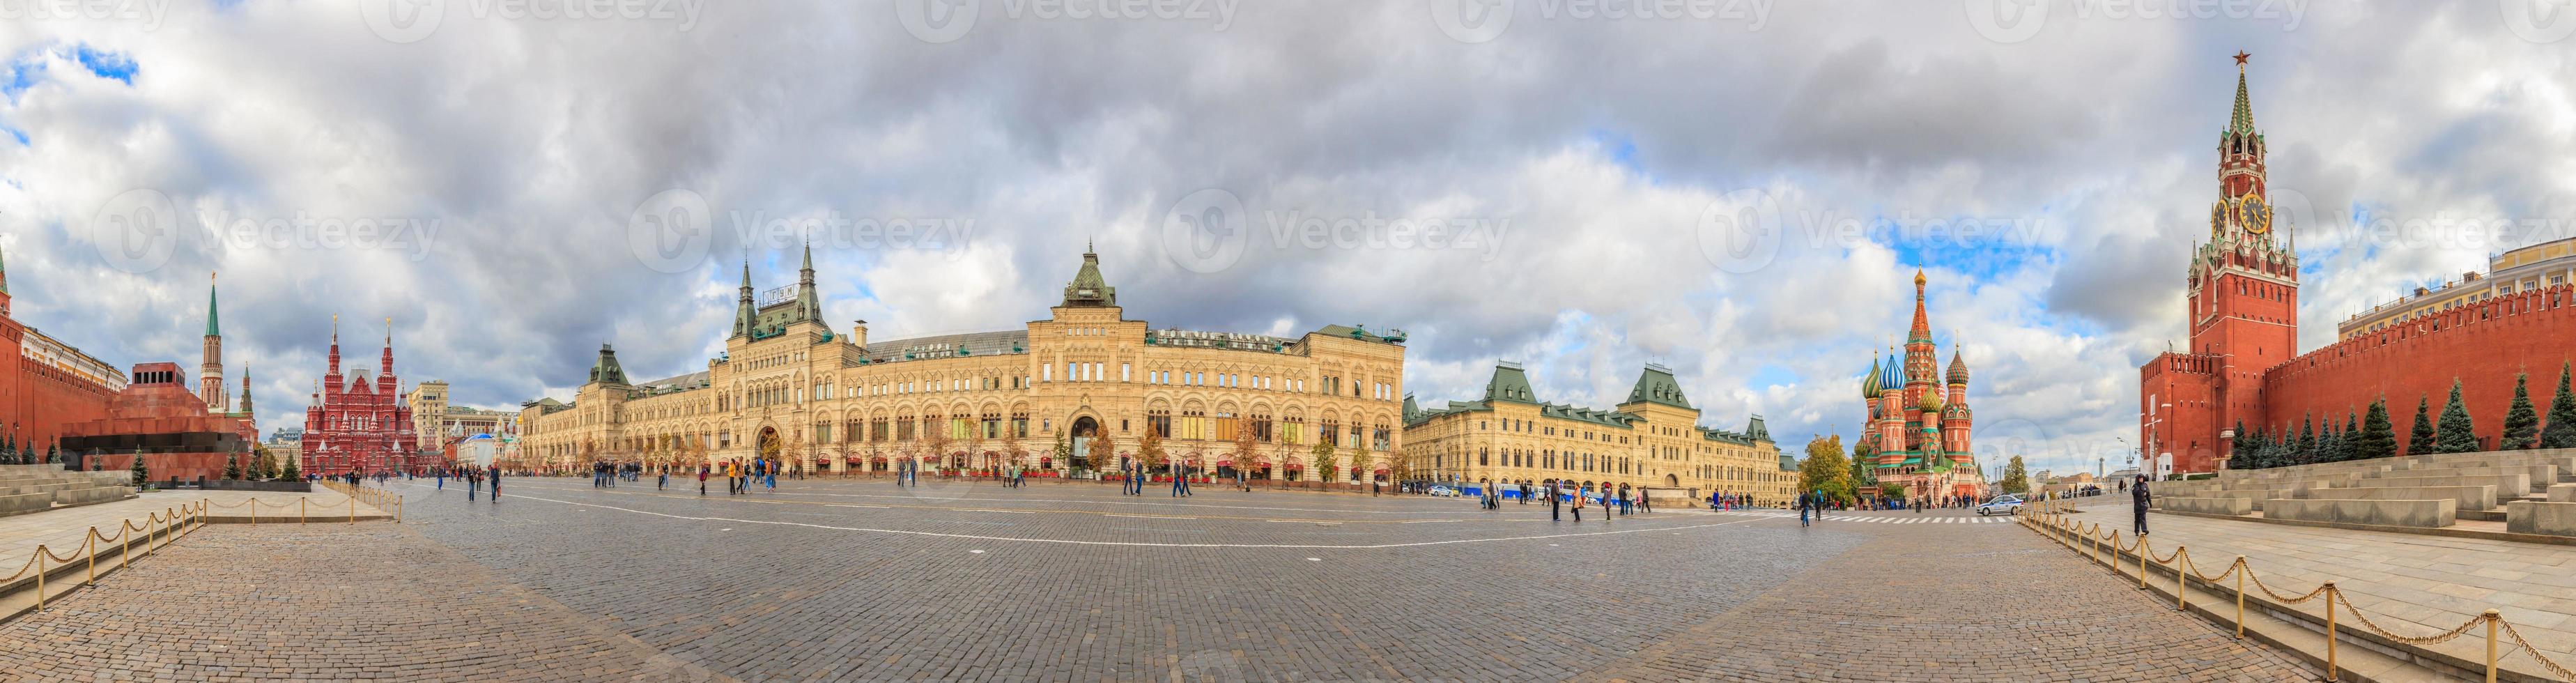 Panorama of Red Square in Moscow during daytime photo